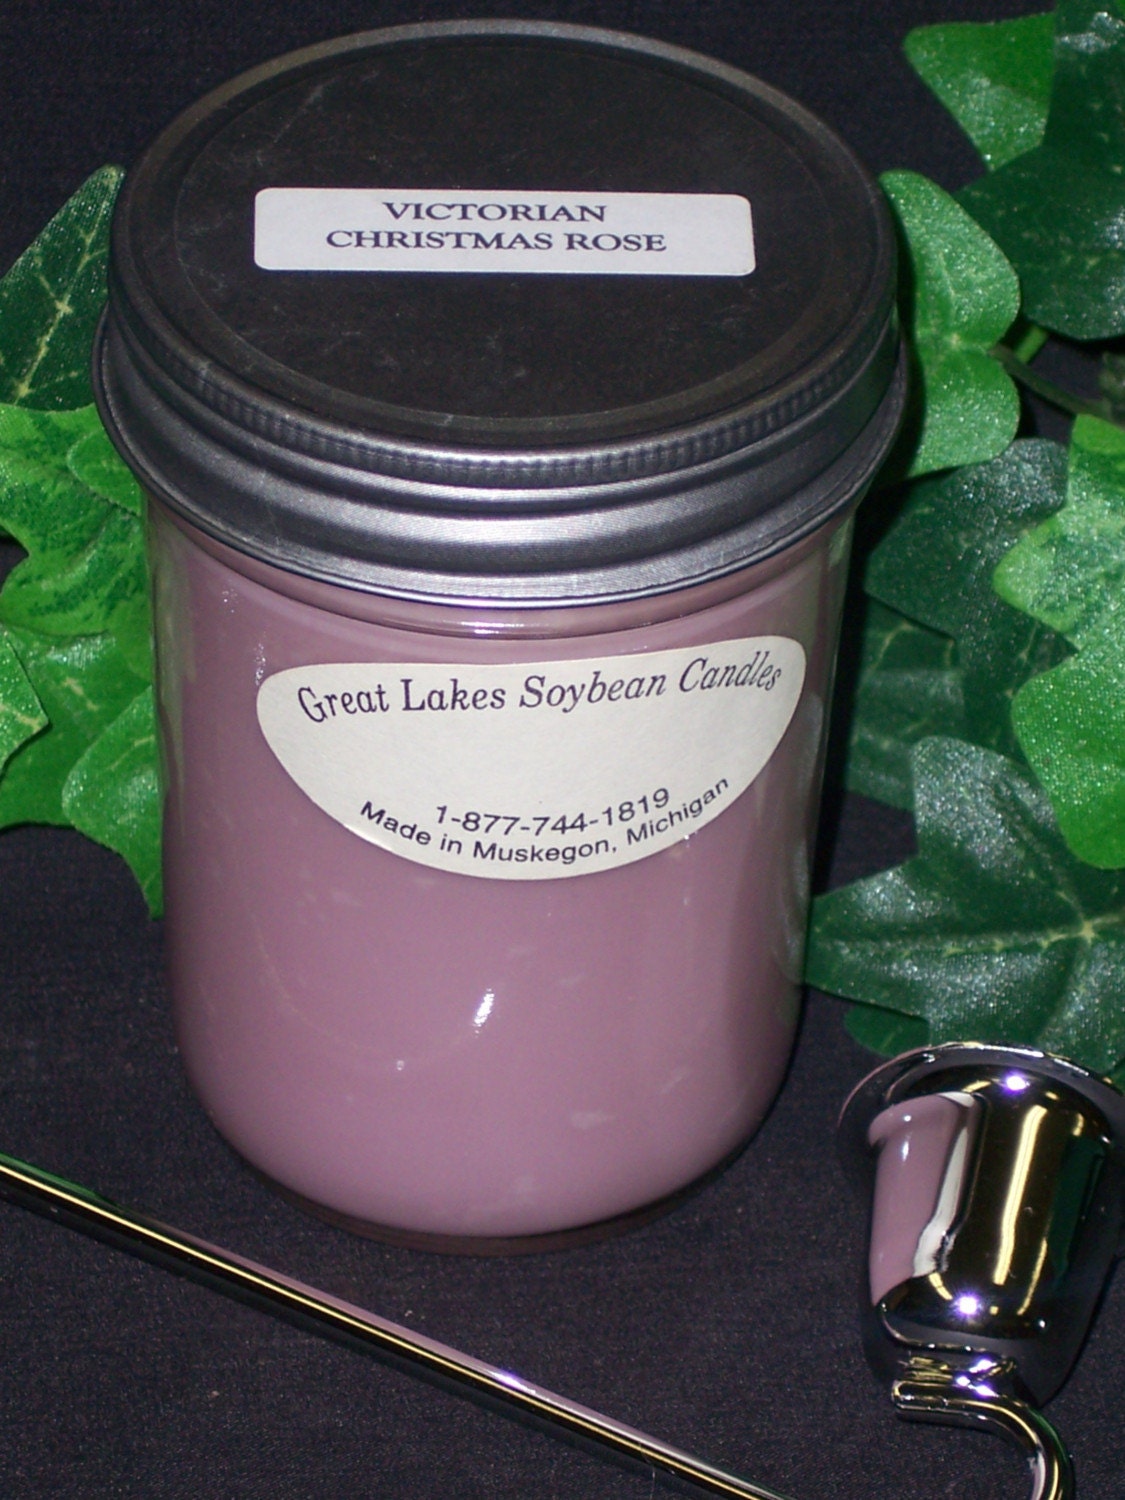 GREAT LAKES SOYBEAN CANDLES VICTORIAN ROSE 8 OZ JAR THIS IS THE STRONGEST ROSE SCENT THAT I CARRY IF YOU LIKE ROSE THIS IS FOR YOU